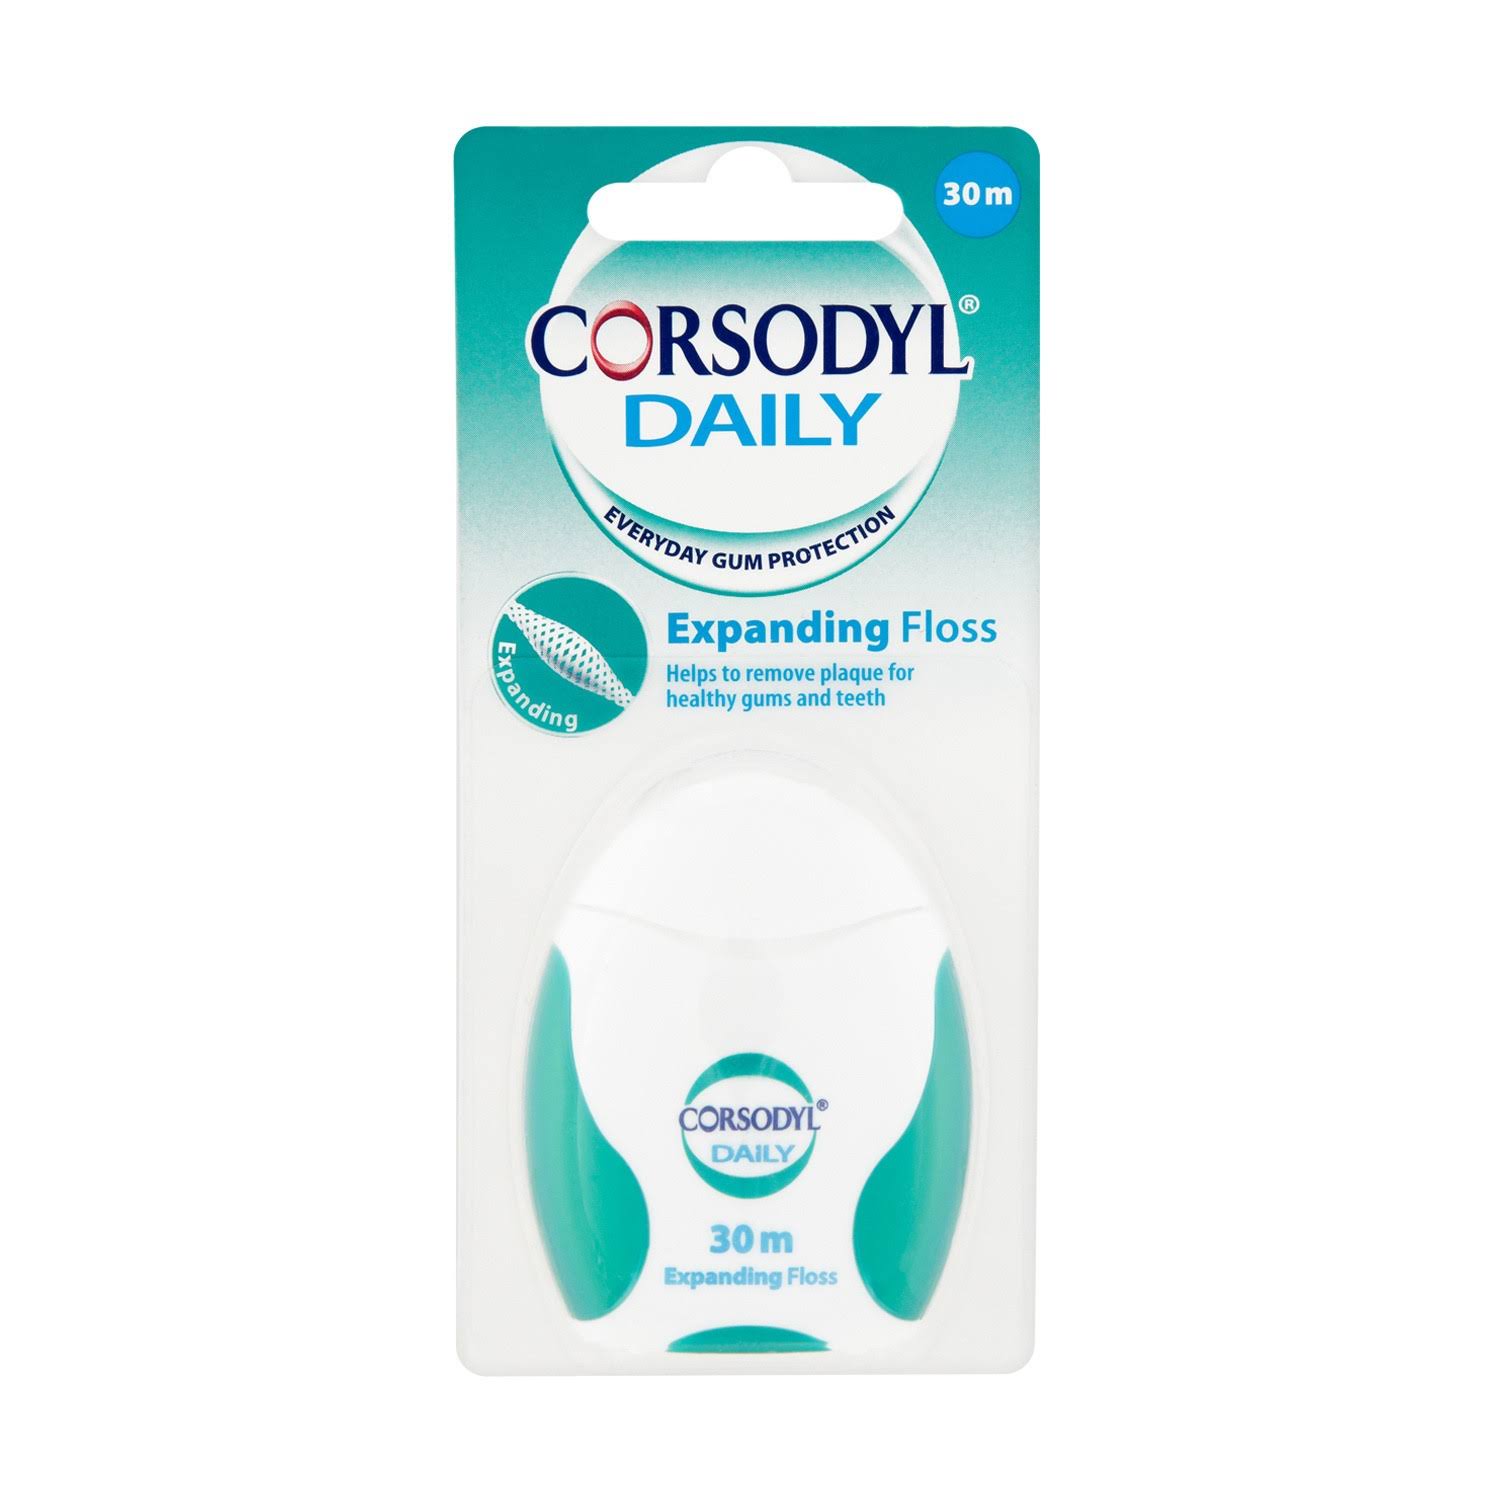 Corsodyl Daily Expanding Floss (30m)